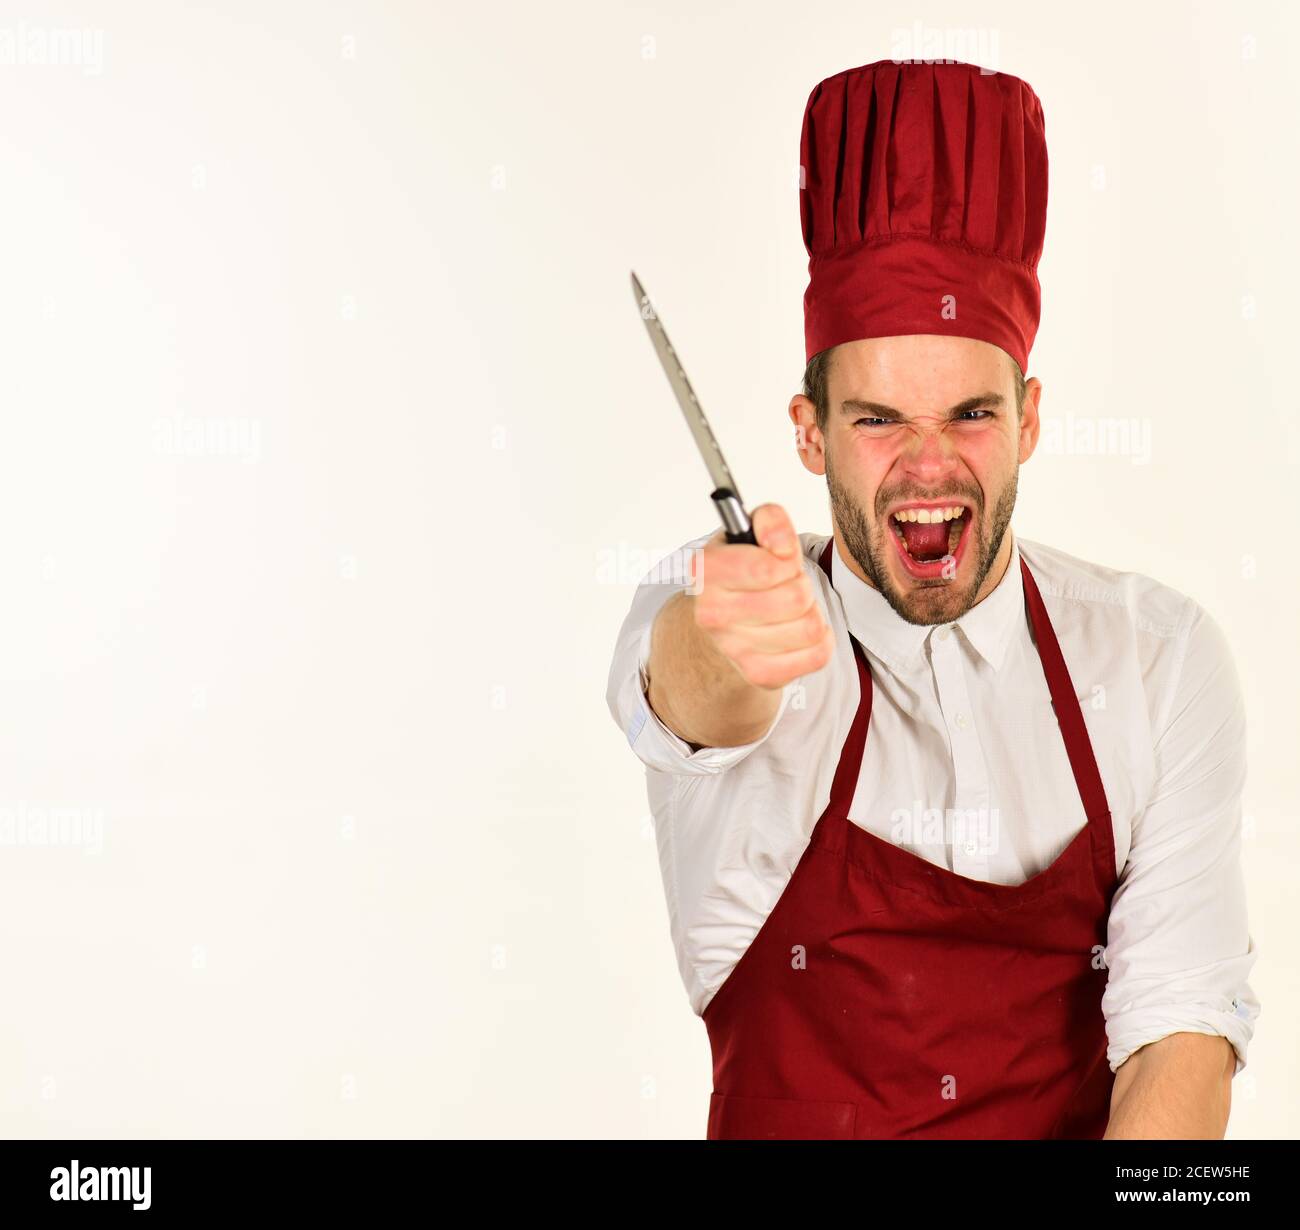 Cook works in kitchen. Man in cook hat and apron shows sharp blade forward in rage. Chef with angry face holds knife on white background. Food preparation and kitchenware concept. Stock Photo